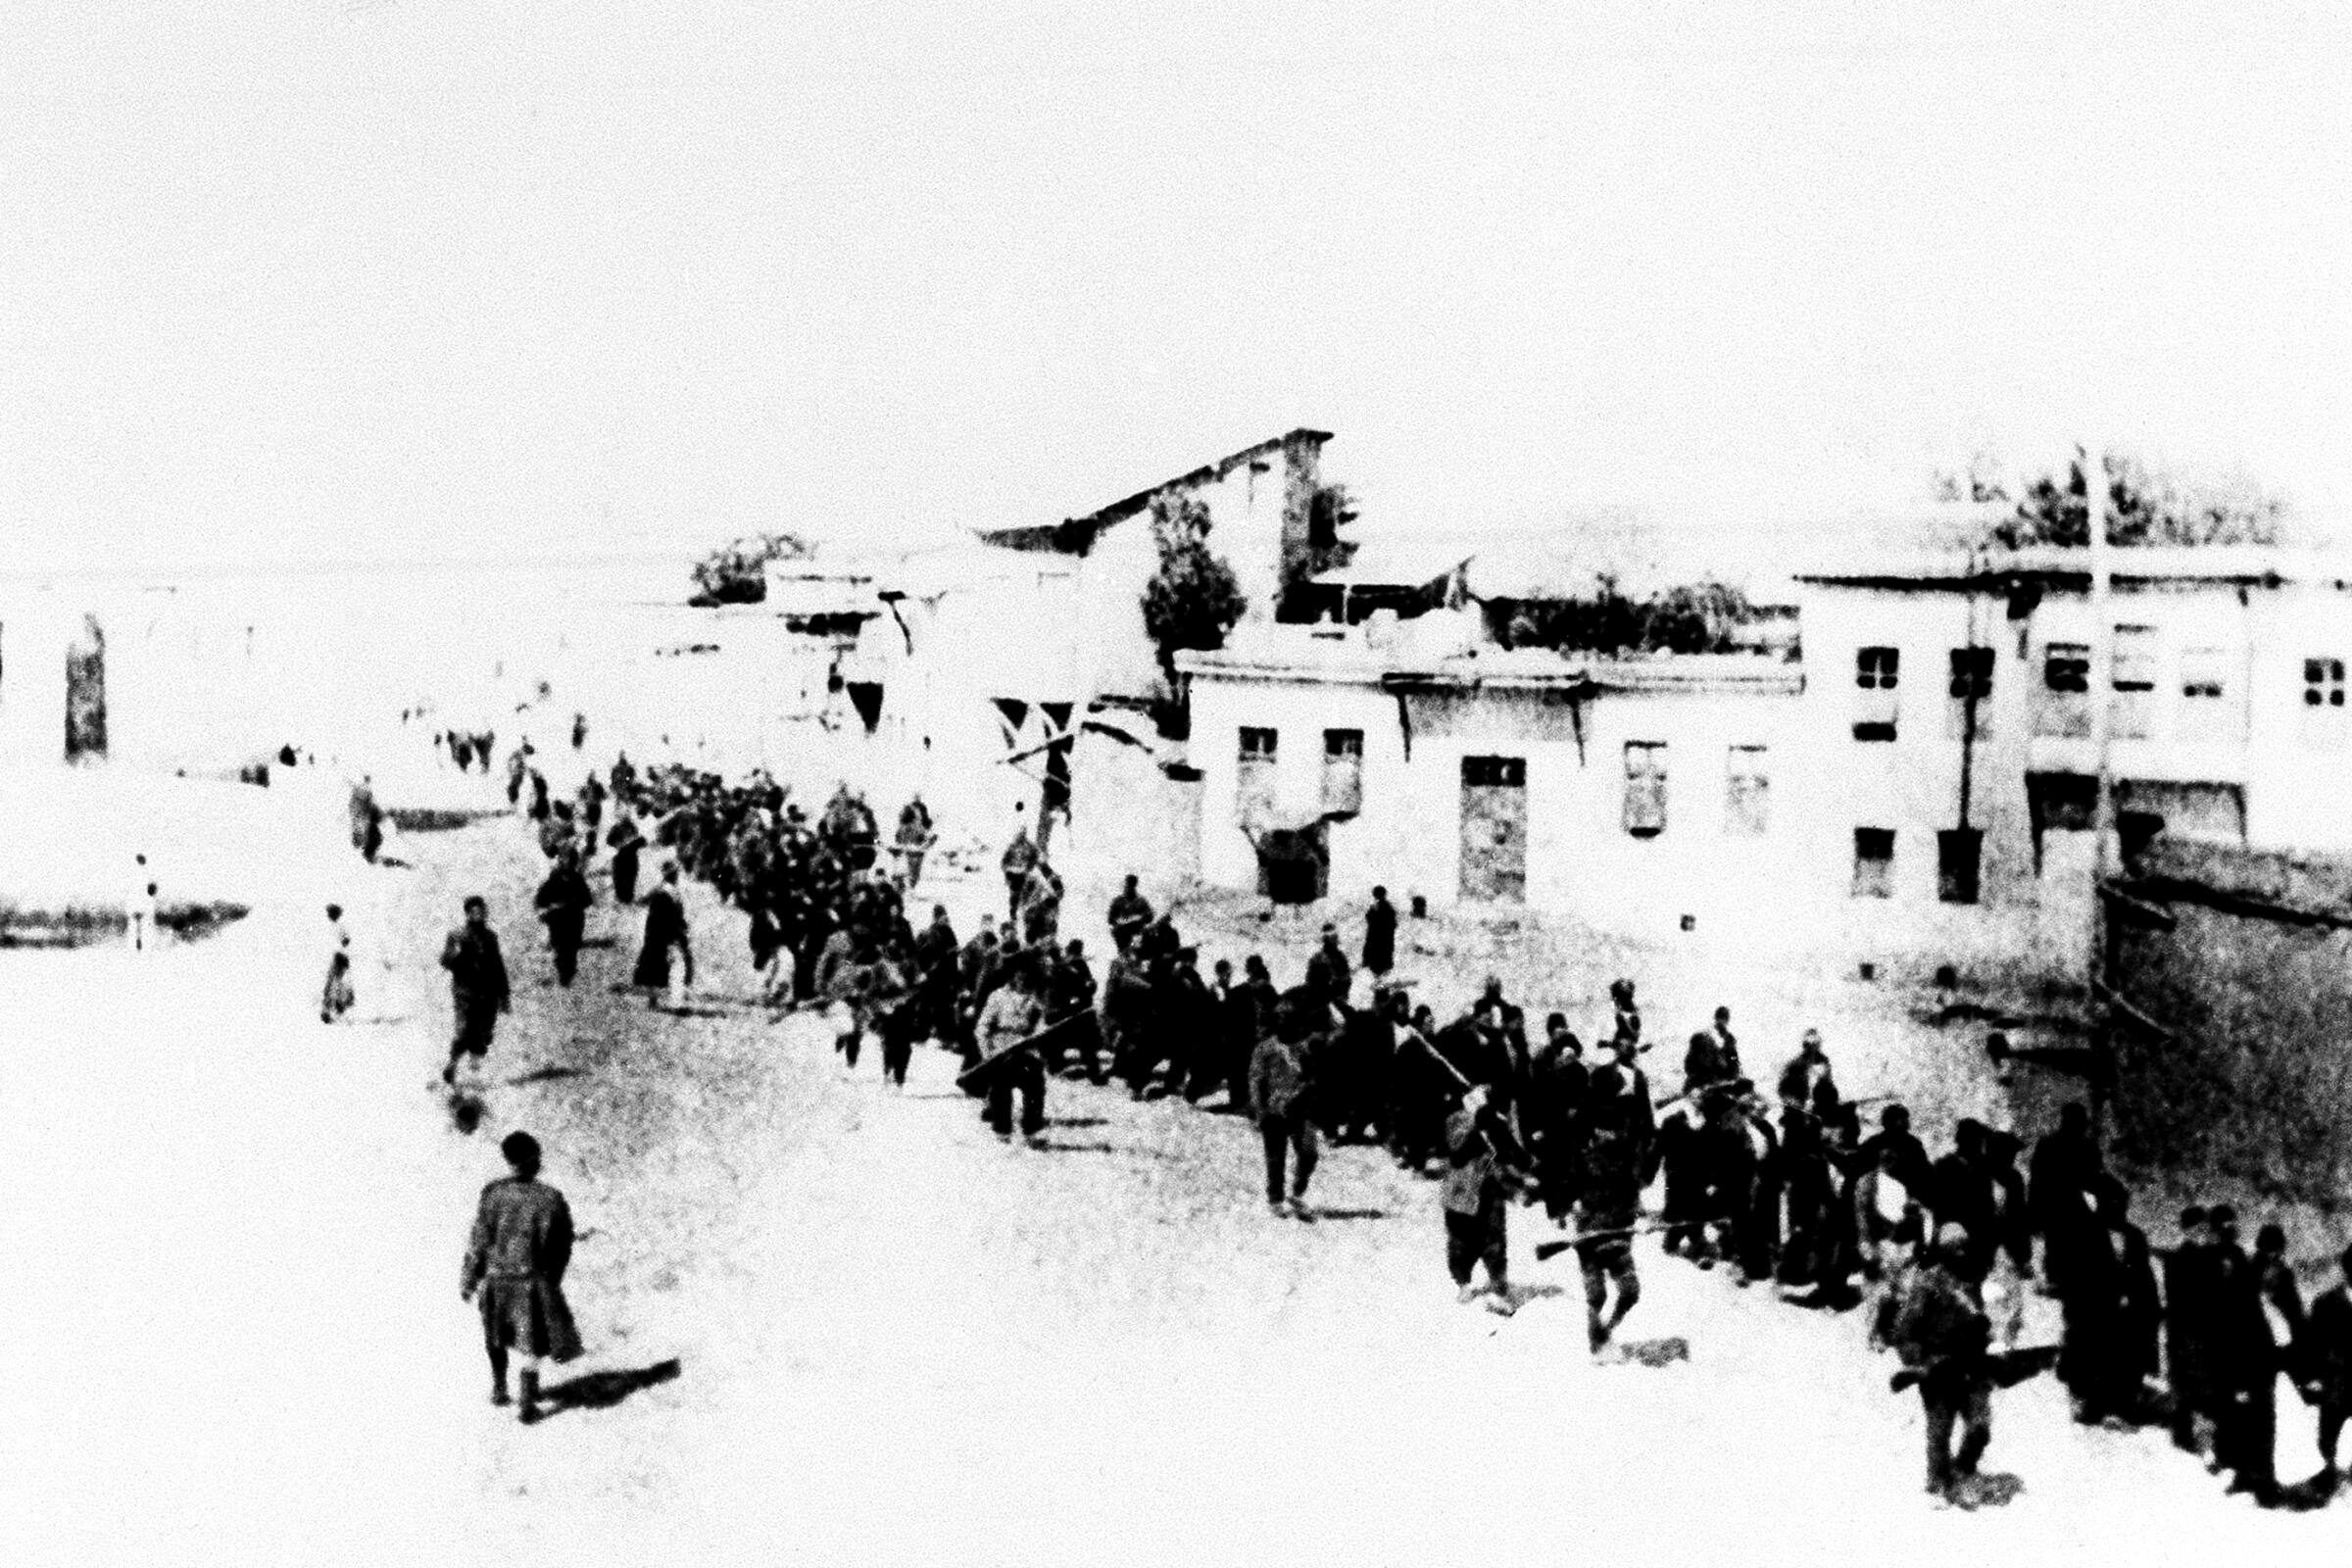 Armenians in the Ottoman Empire are led on a march in 1915.